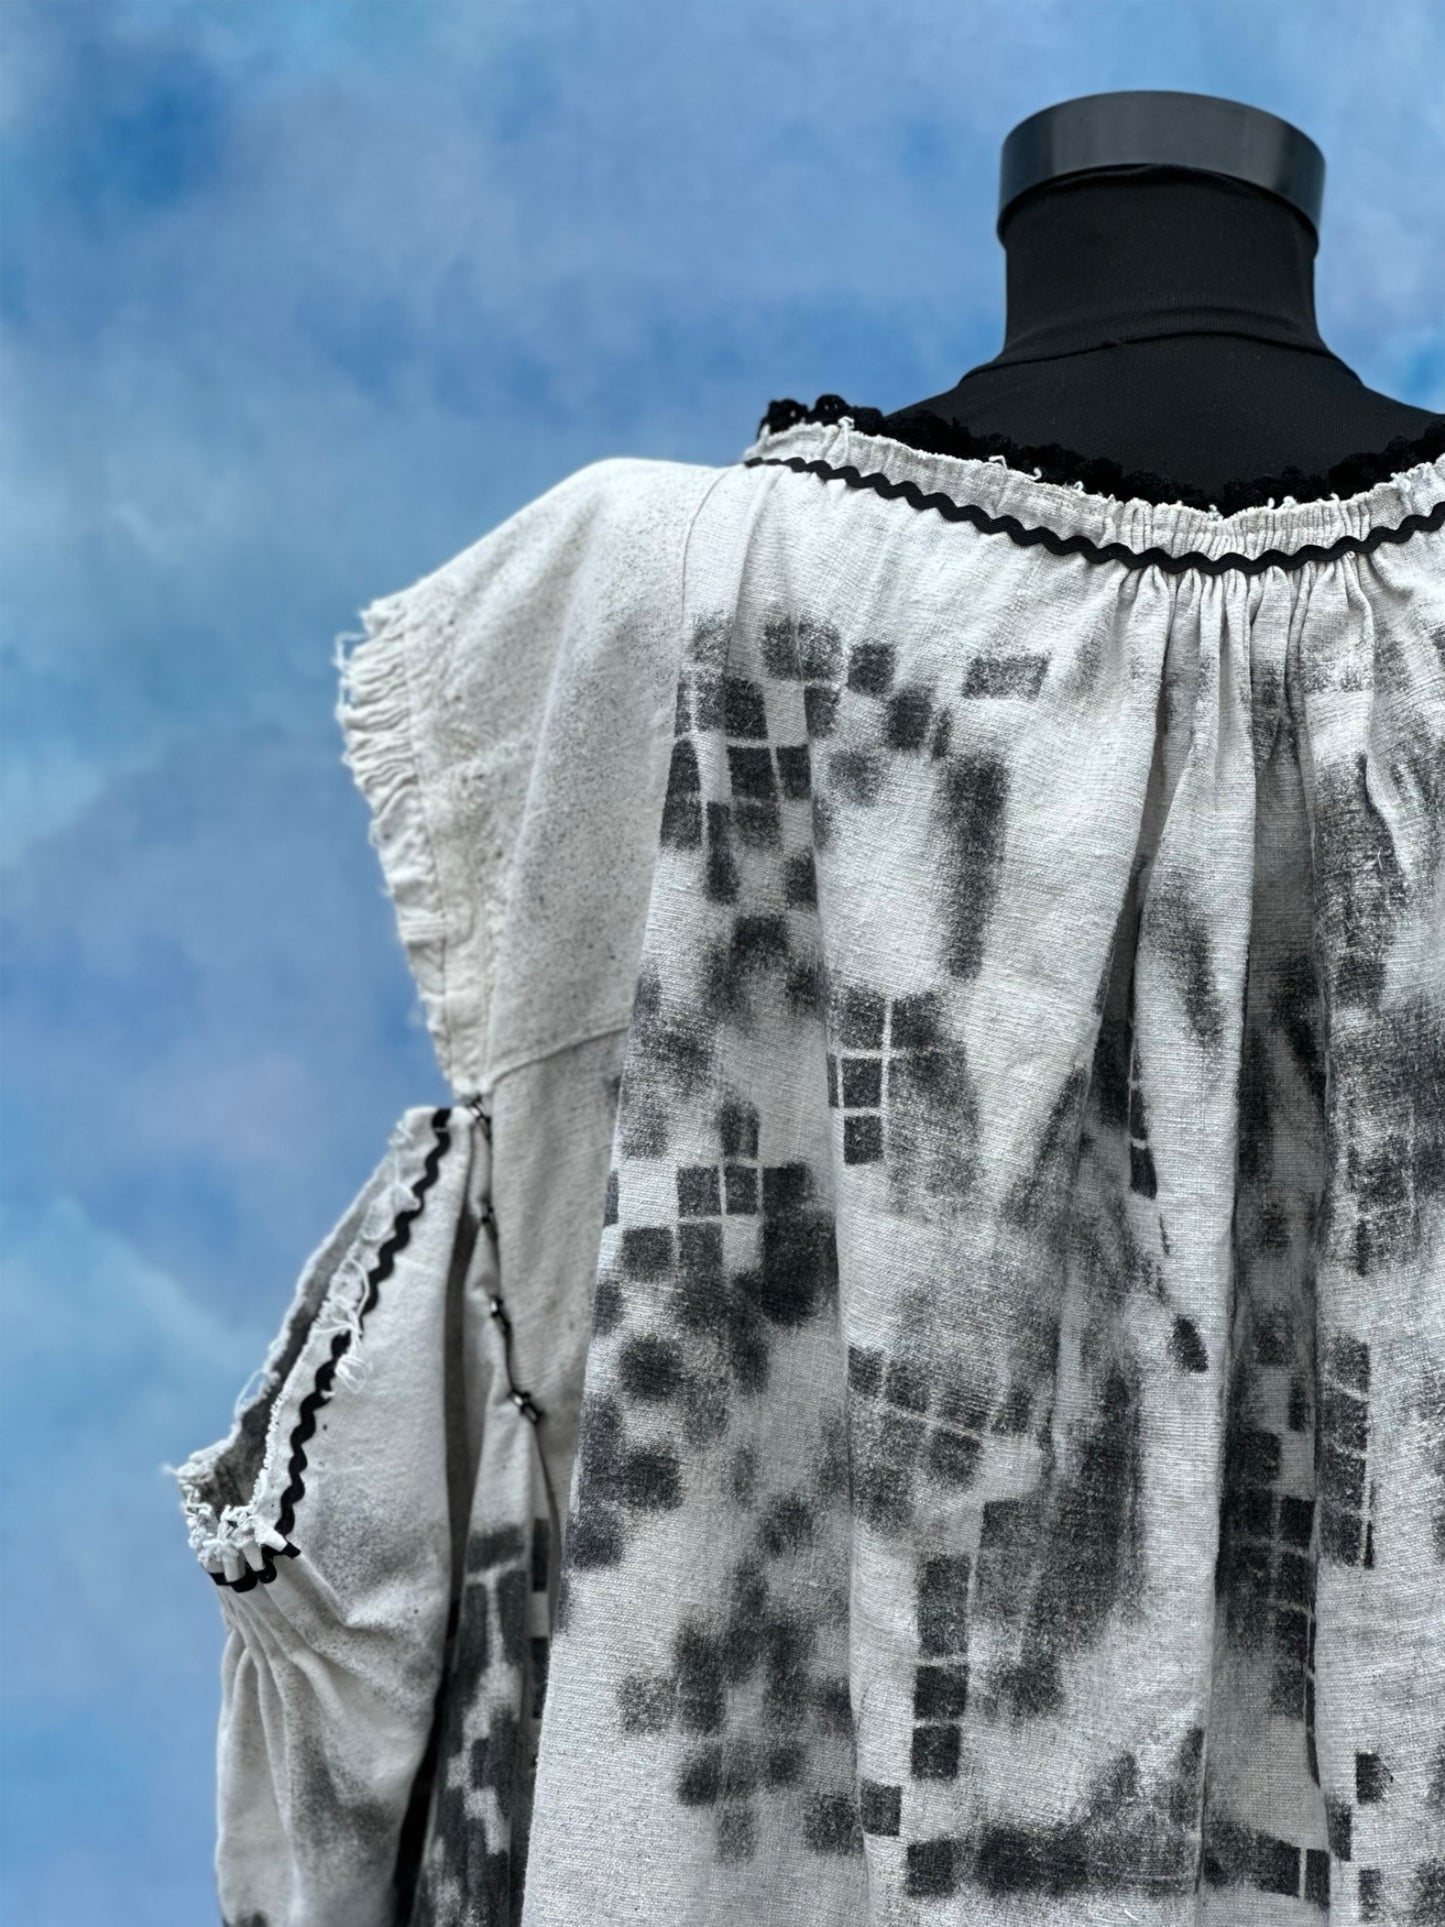 "Dor" White Dress With Black Hand-painted Details